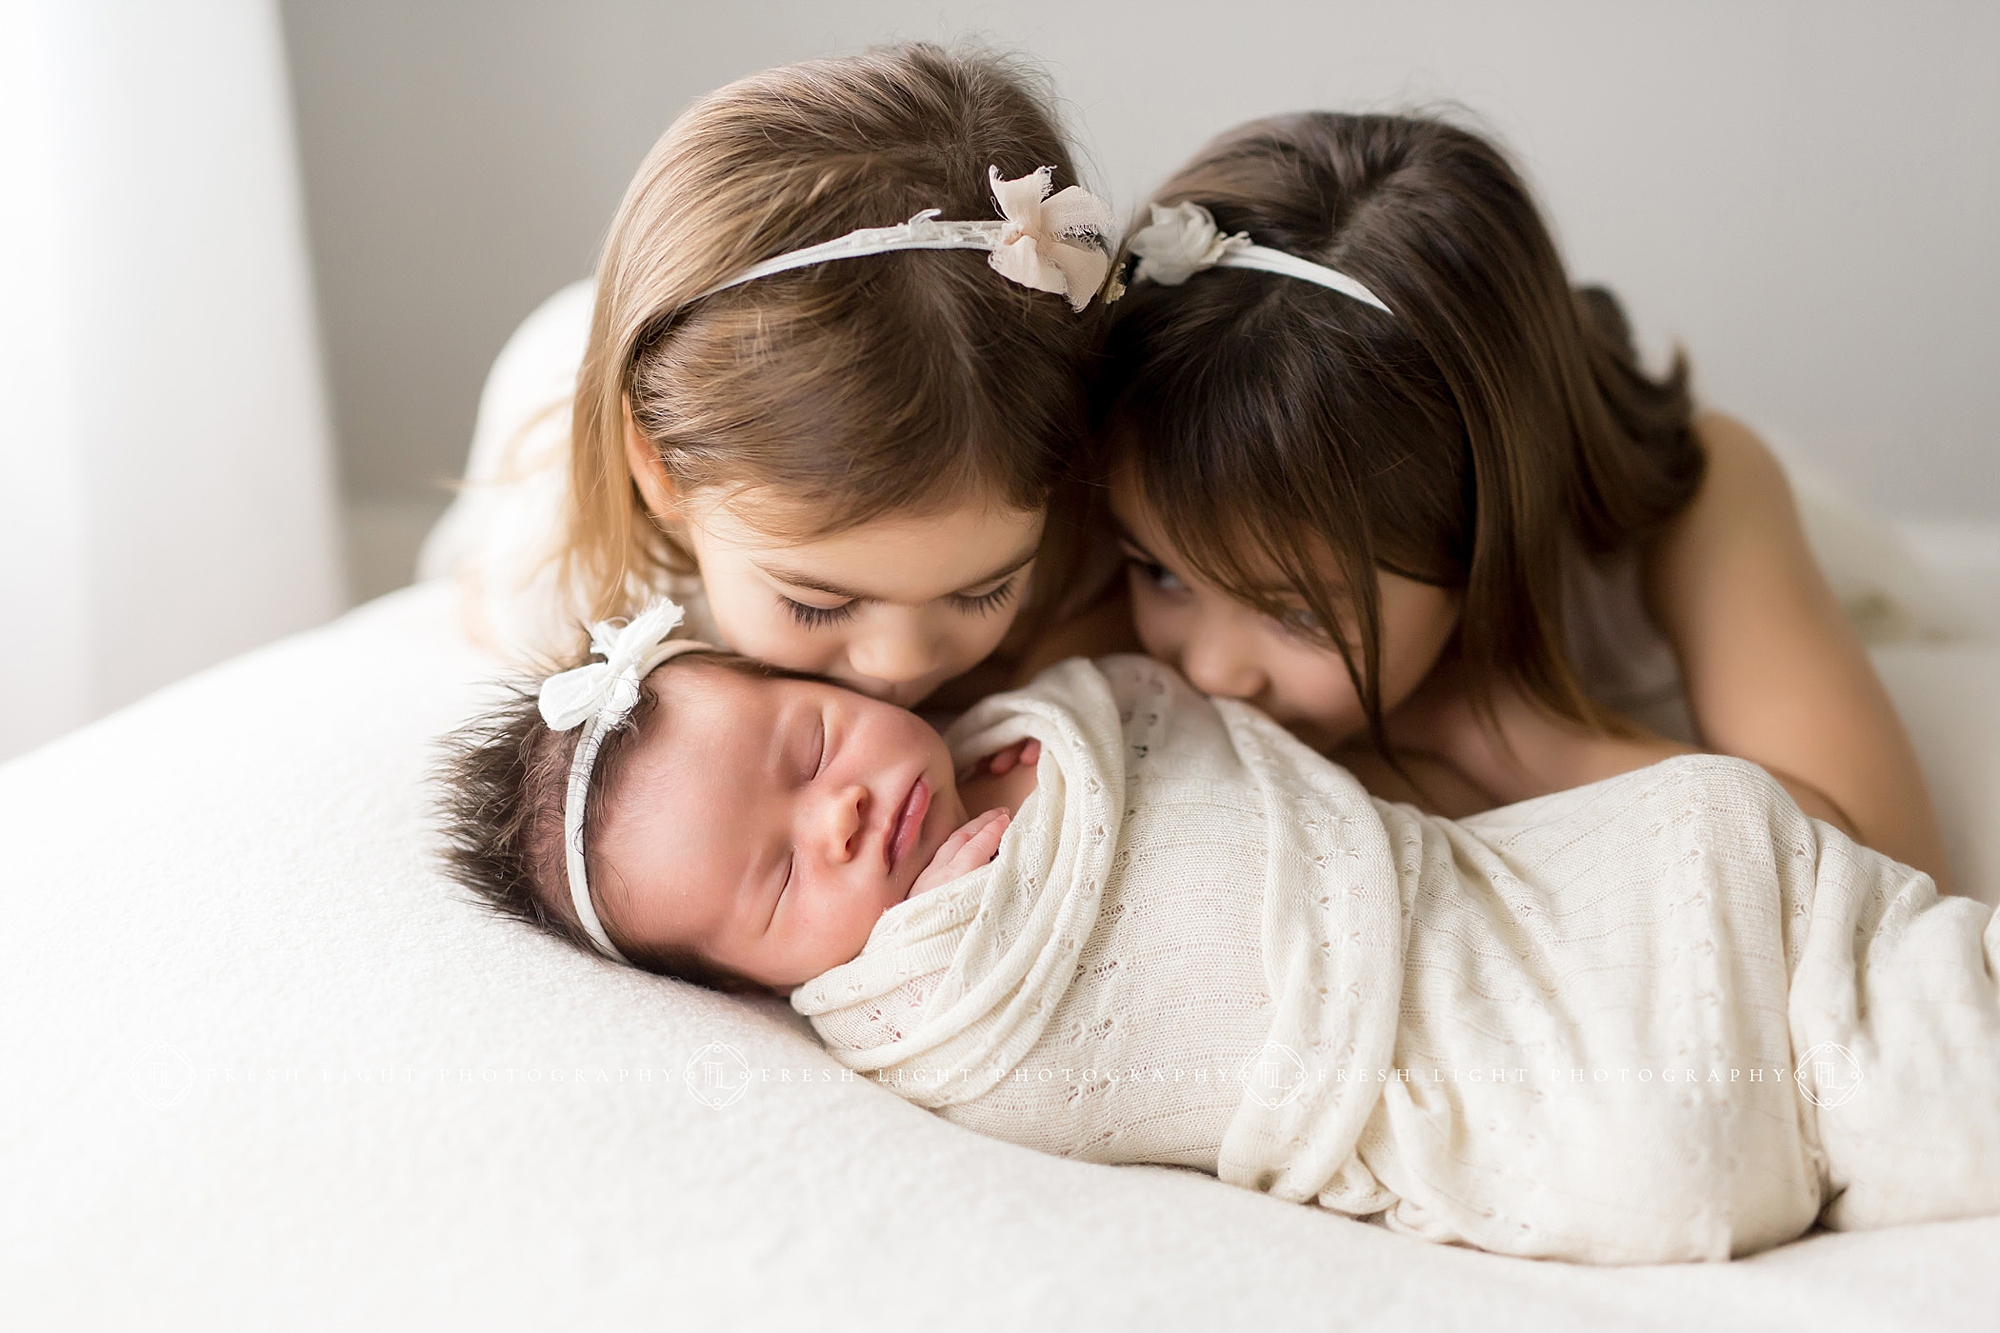 sisters kissing their new baby sister